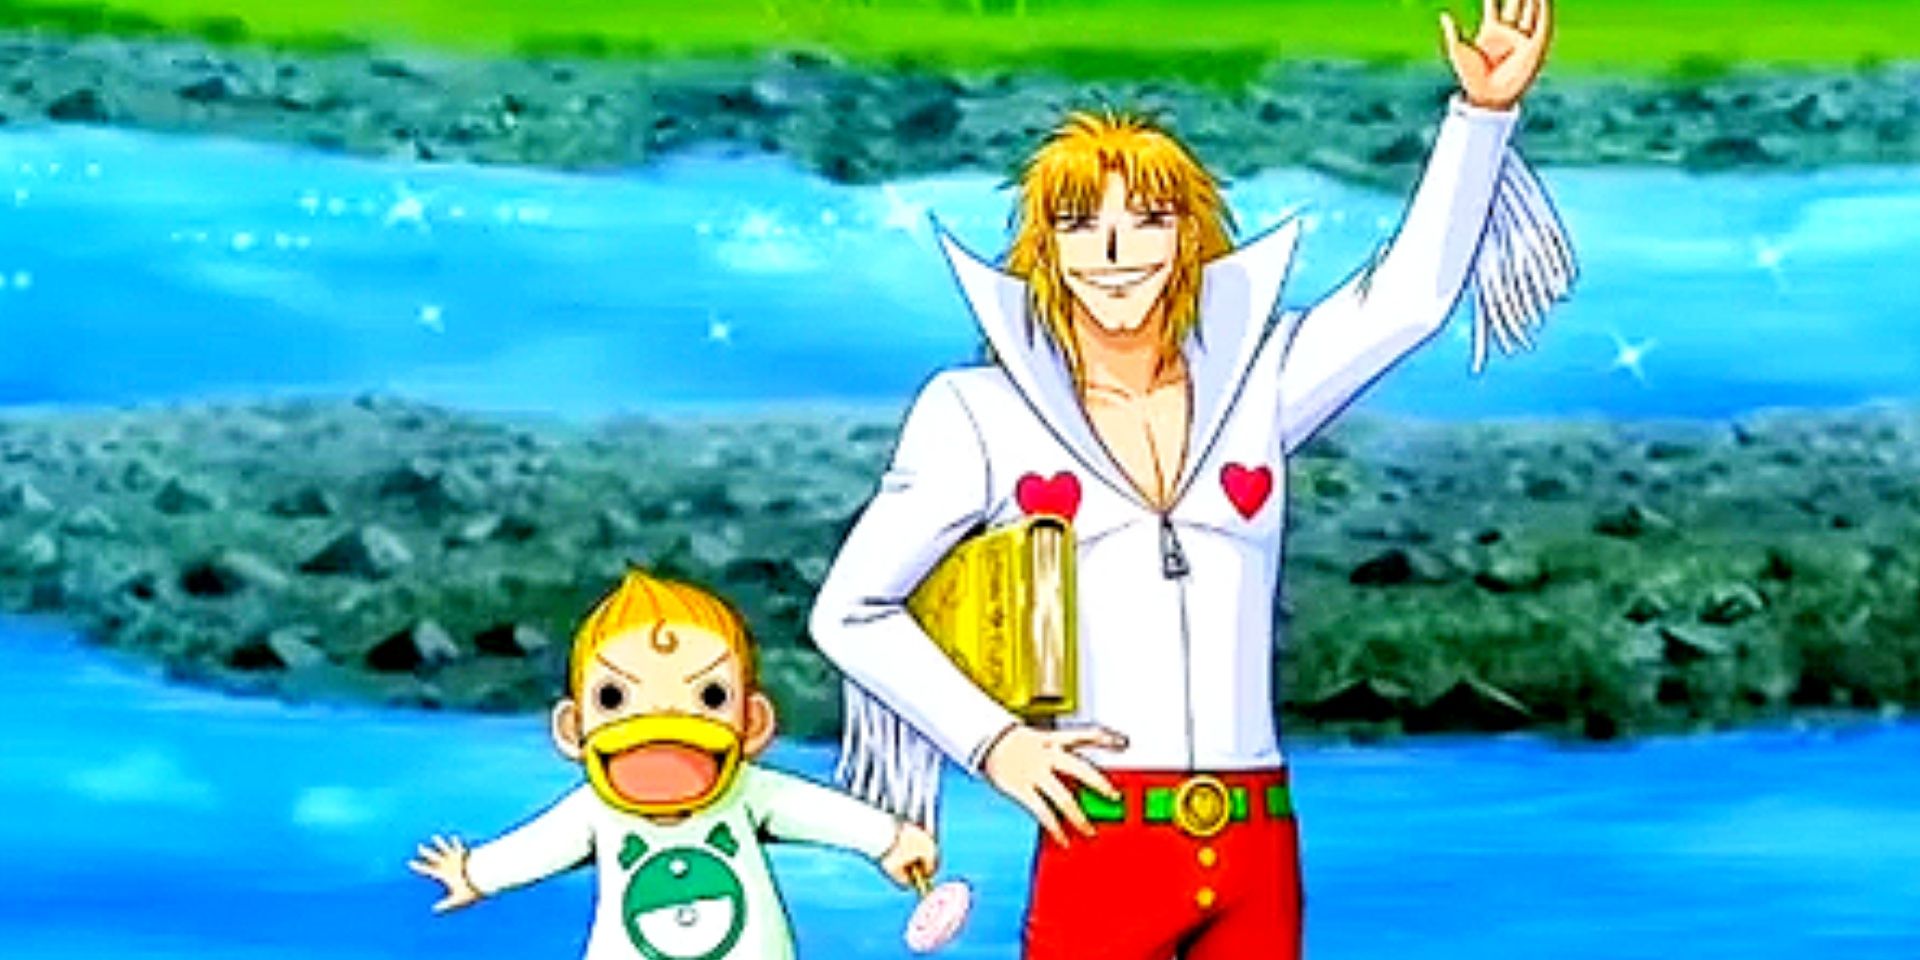 Kanchome and Parco Folgore waving in a lake